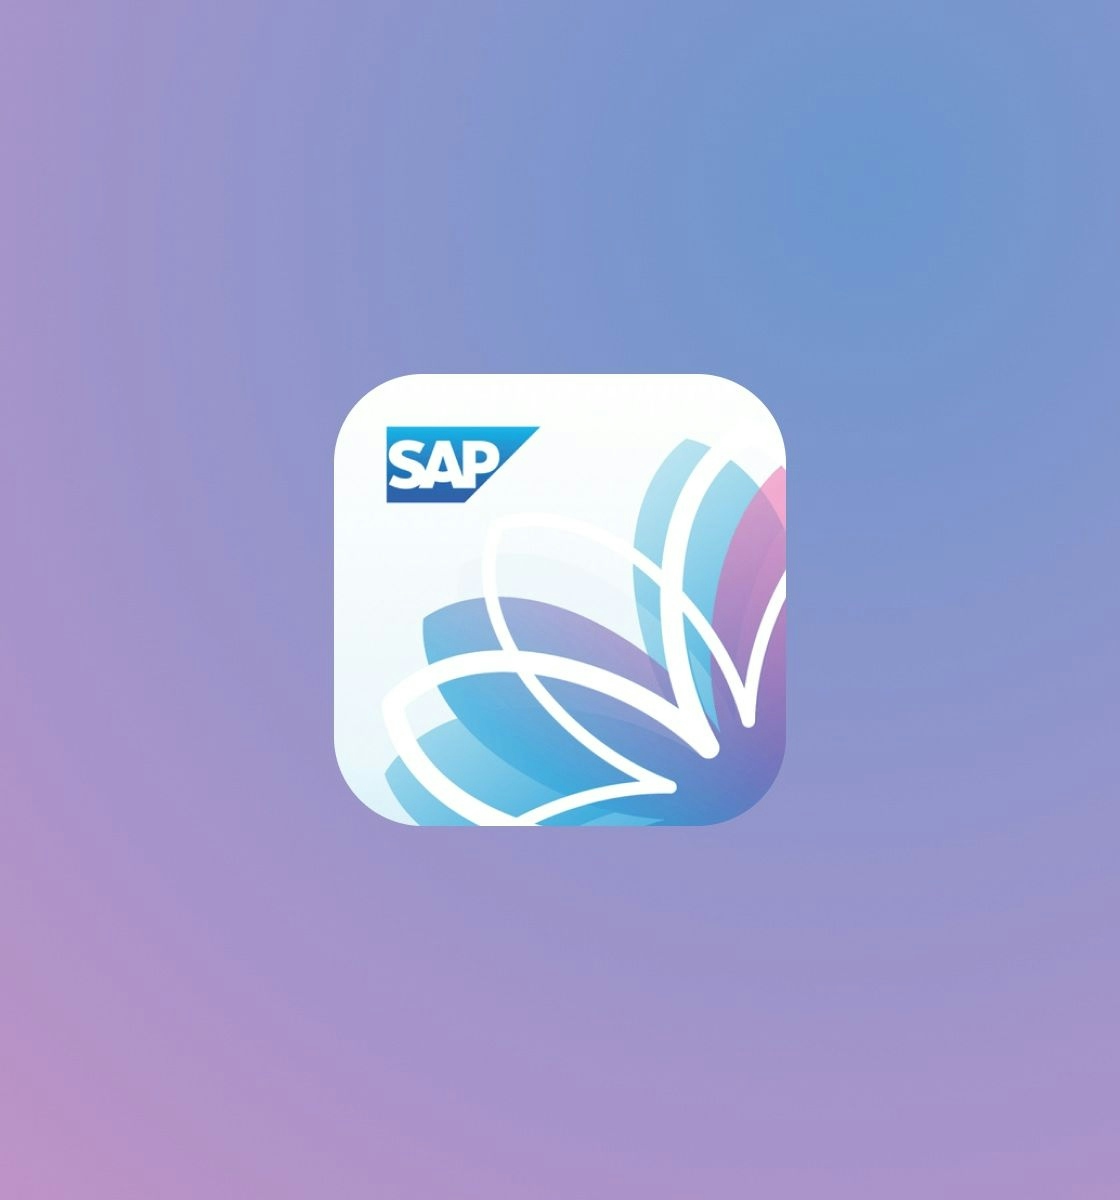 Rethinking the UX of the organization’s internal SAP applications